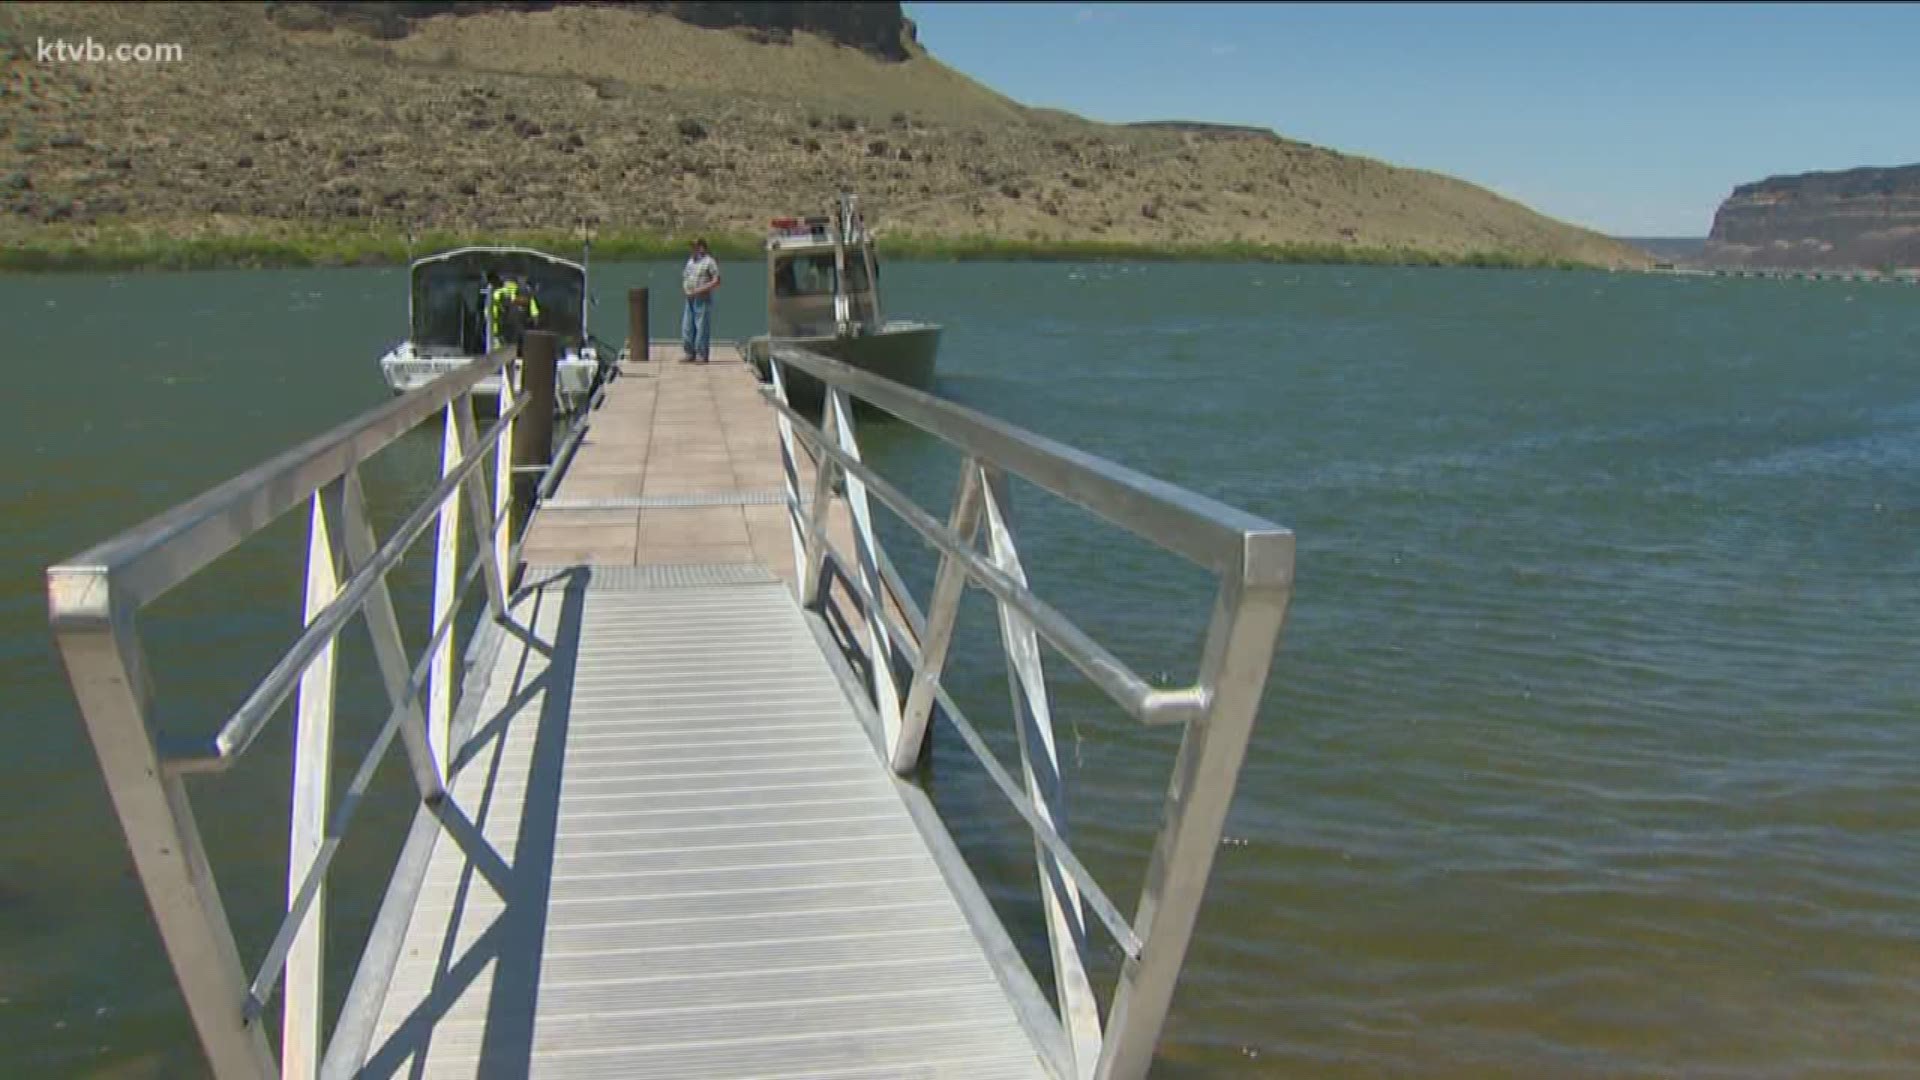 According to the Ada County Sheriff's Office, the 42-year-old was fishing from a dock around 1 a.m. Sunday and nearby campers called 911 around 1:30 a.m. after they heard the sound of someone calling for help in the river and struggling in the water.